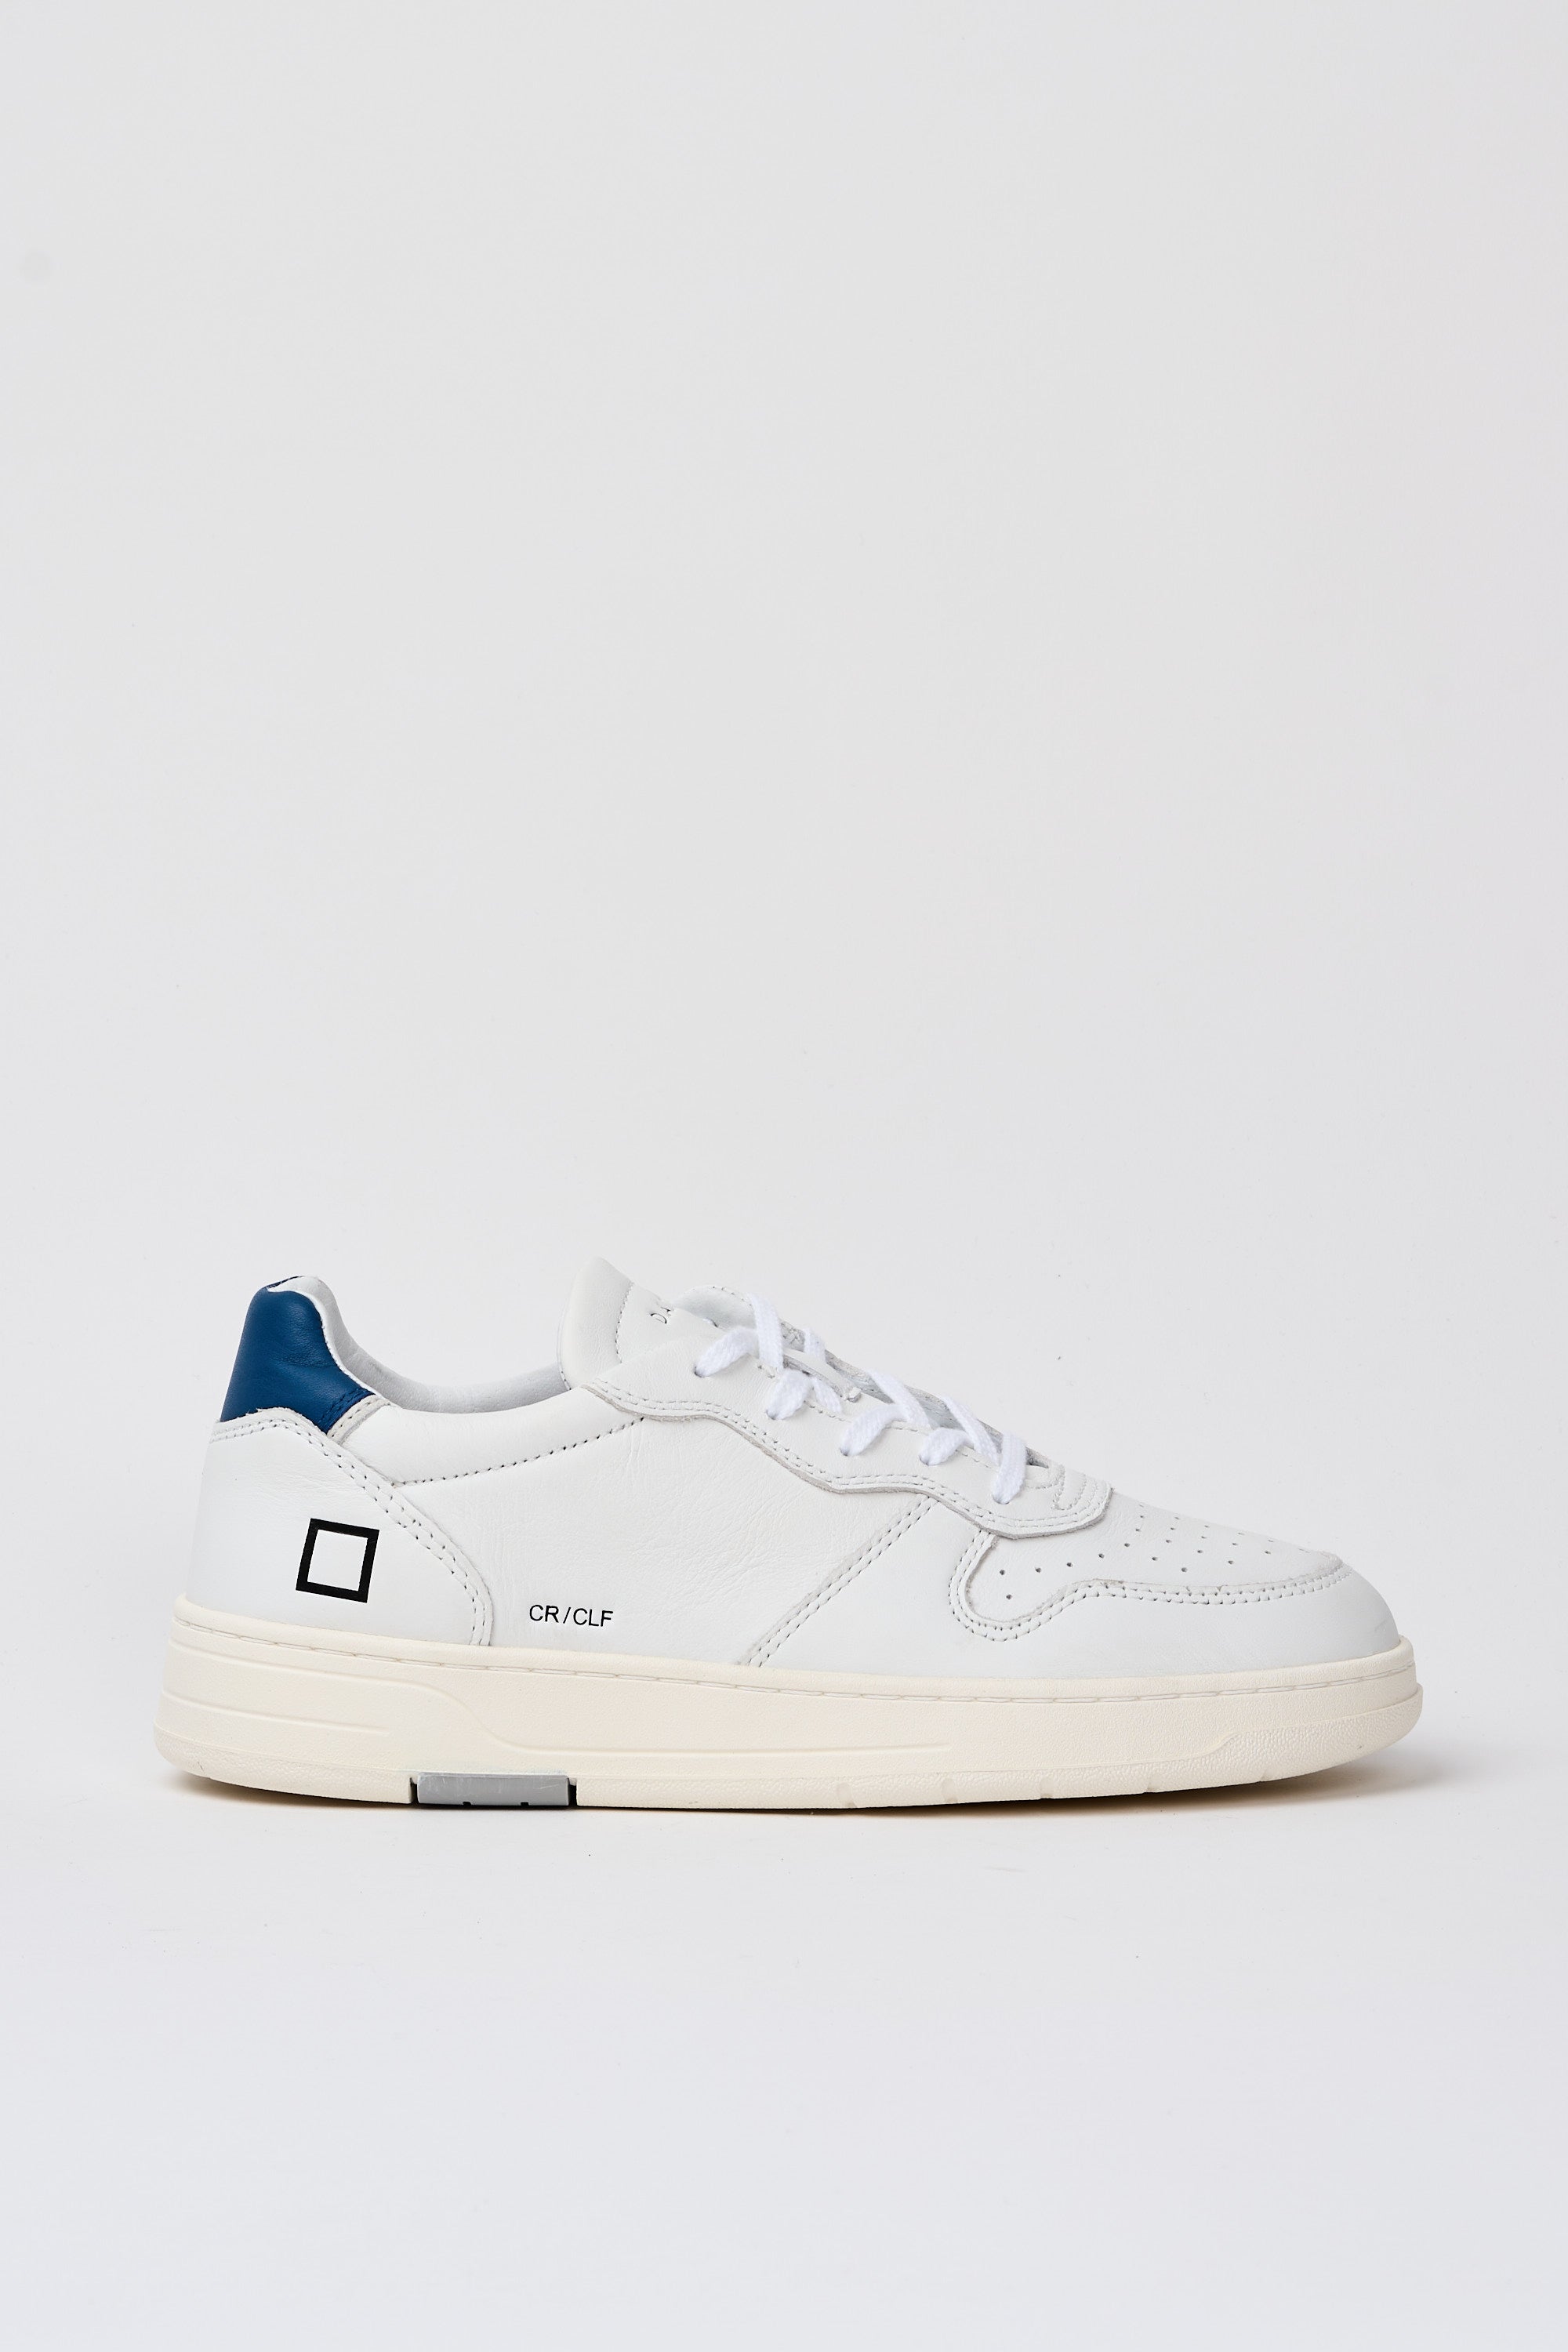 D.A.T.E. Leather Court Sneaker in White/Blue-1